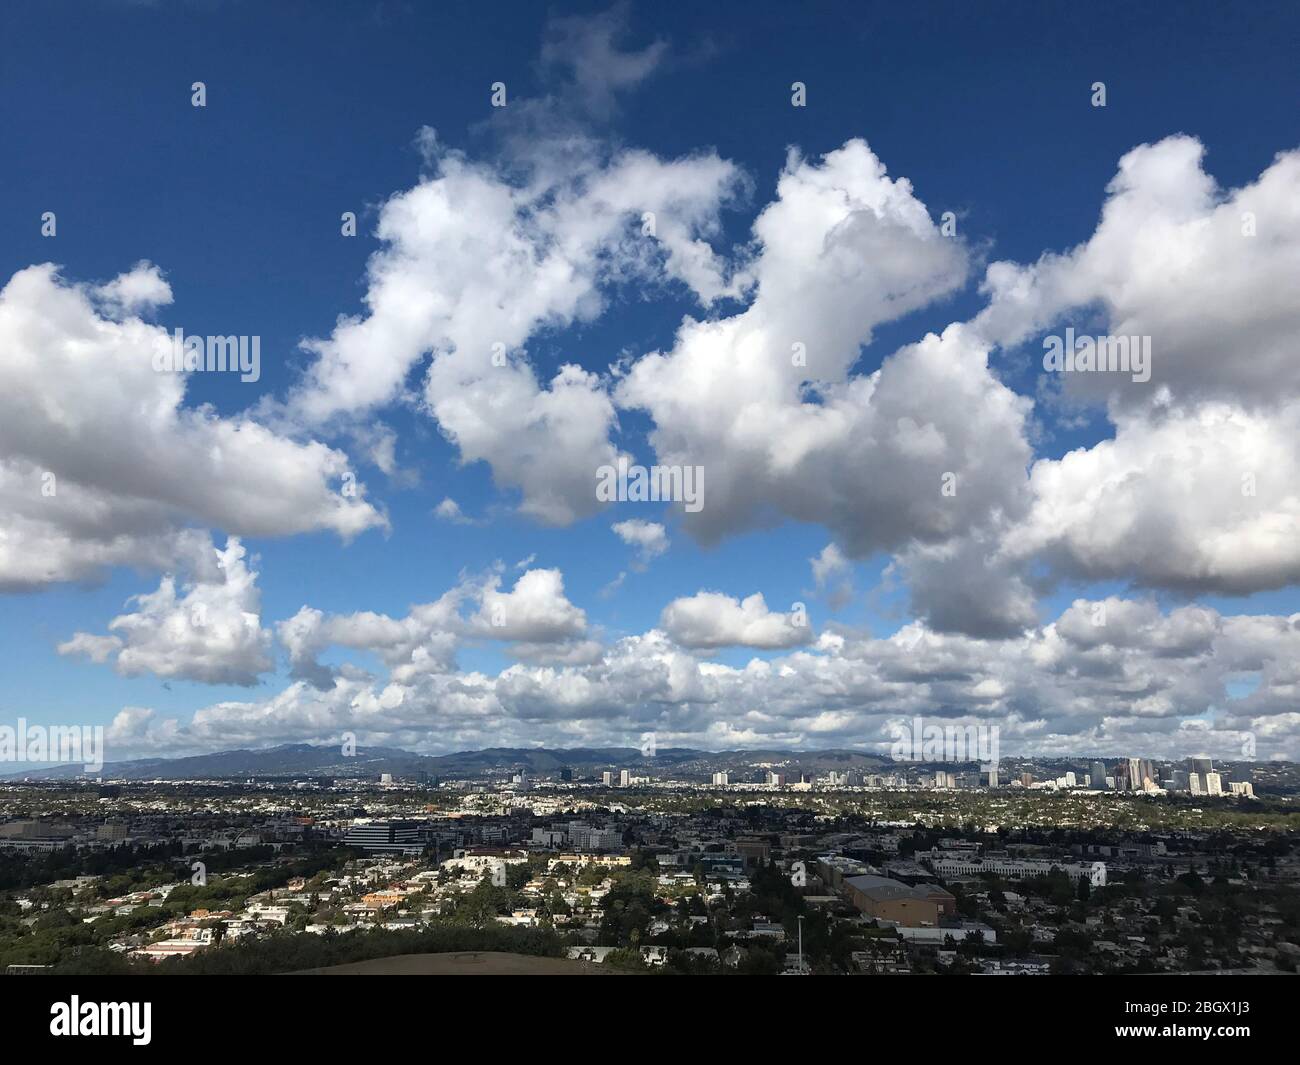 View across the Los Angeles basin of Culver City, Century City and Westwood from Baldwin Hills Scenic Overlook park on a clear day. Stock Photo